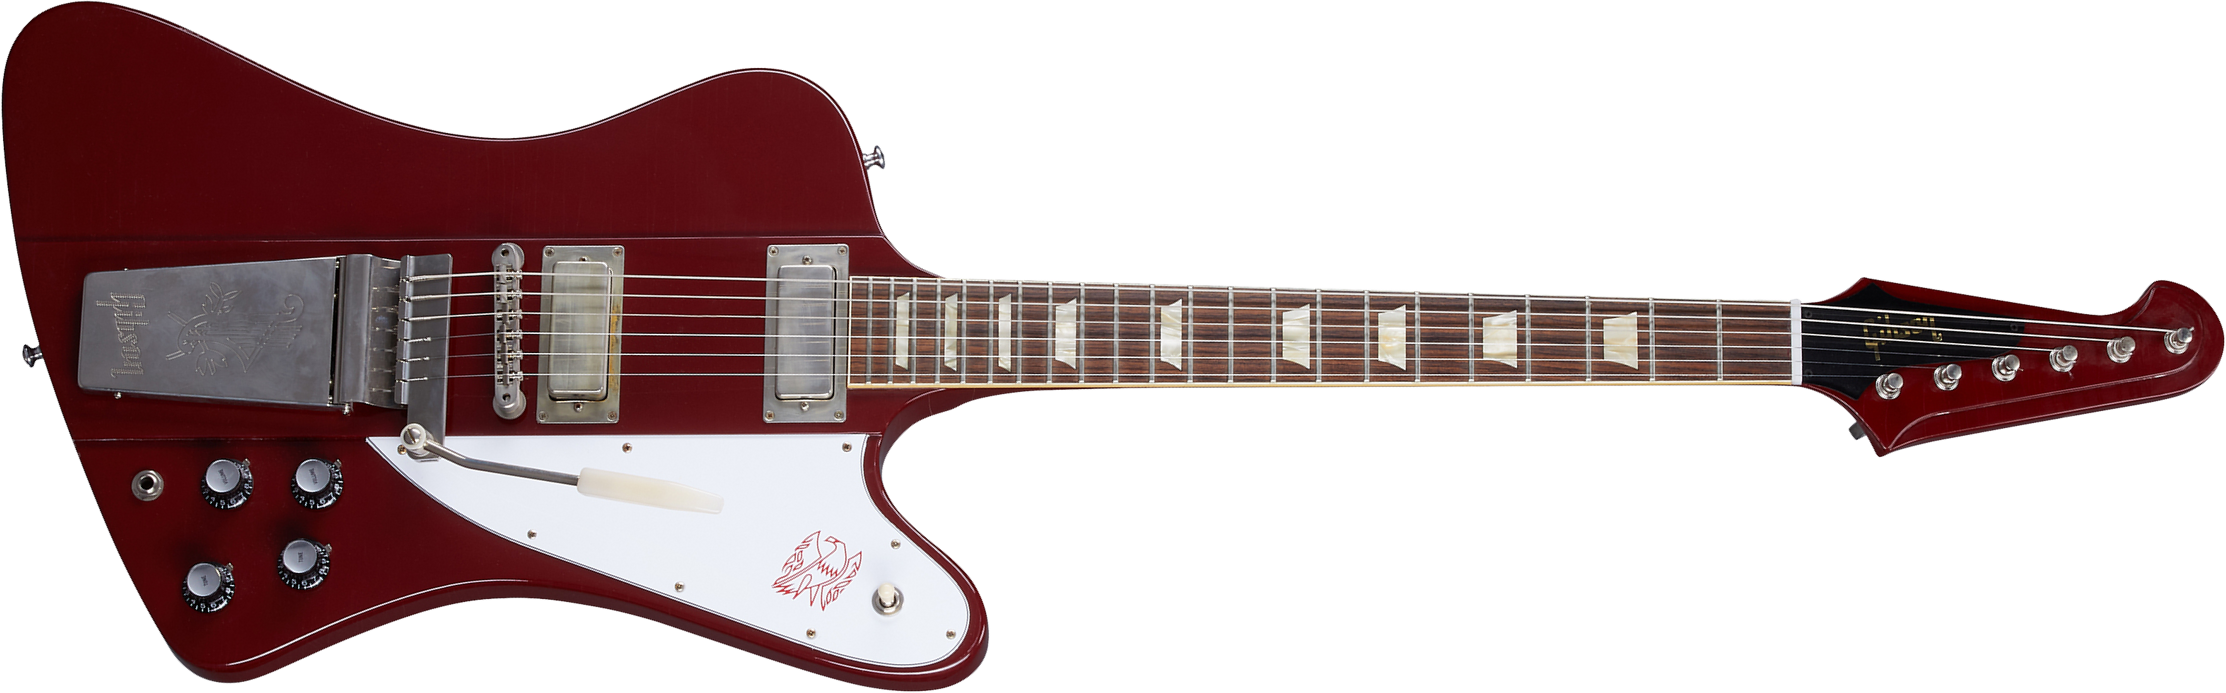 Gibson Custom Shop Murphy Lab Firebird 1963 Maestro Reissue Trem 2mh Rw - Ultra Light Aged Ember Red - Guitare Électrique RÉtro Rock - Main picture